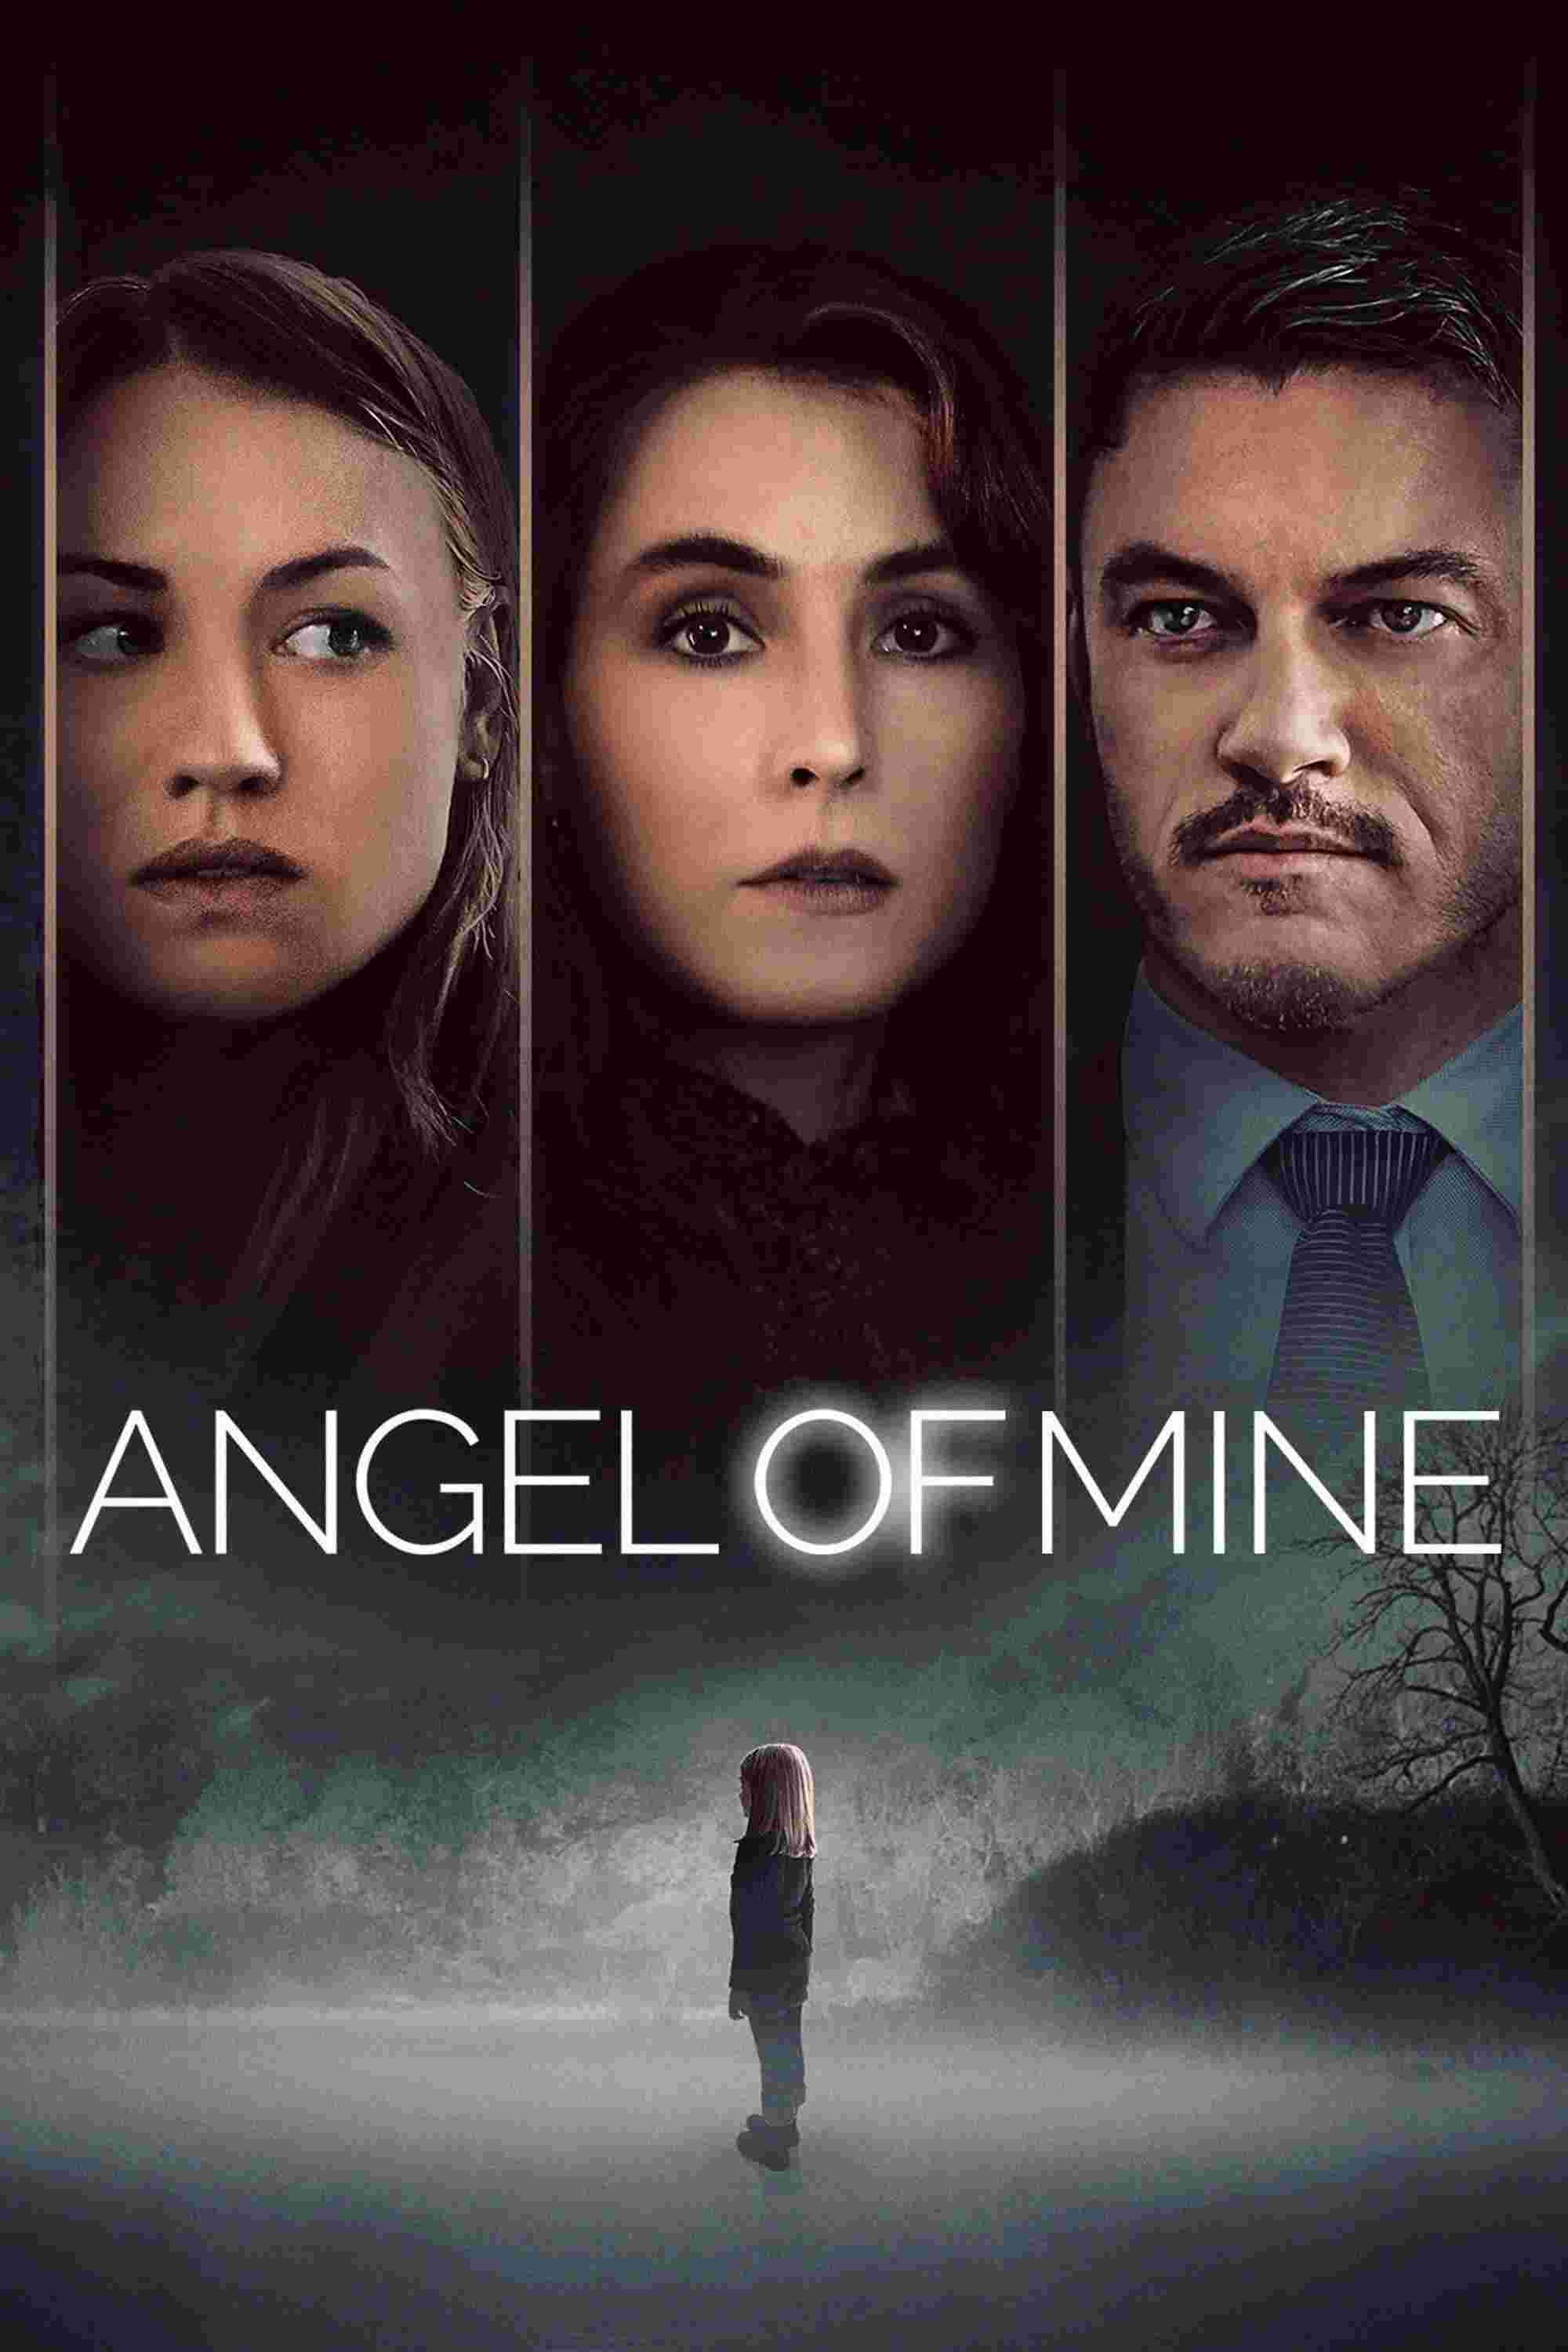 Angel of Mine (2019) Noomi Rapace